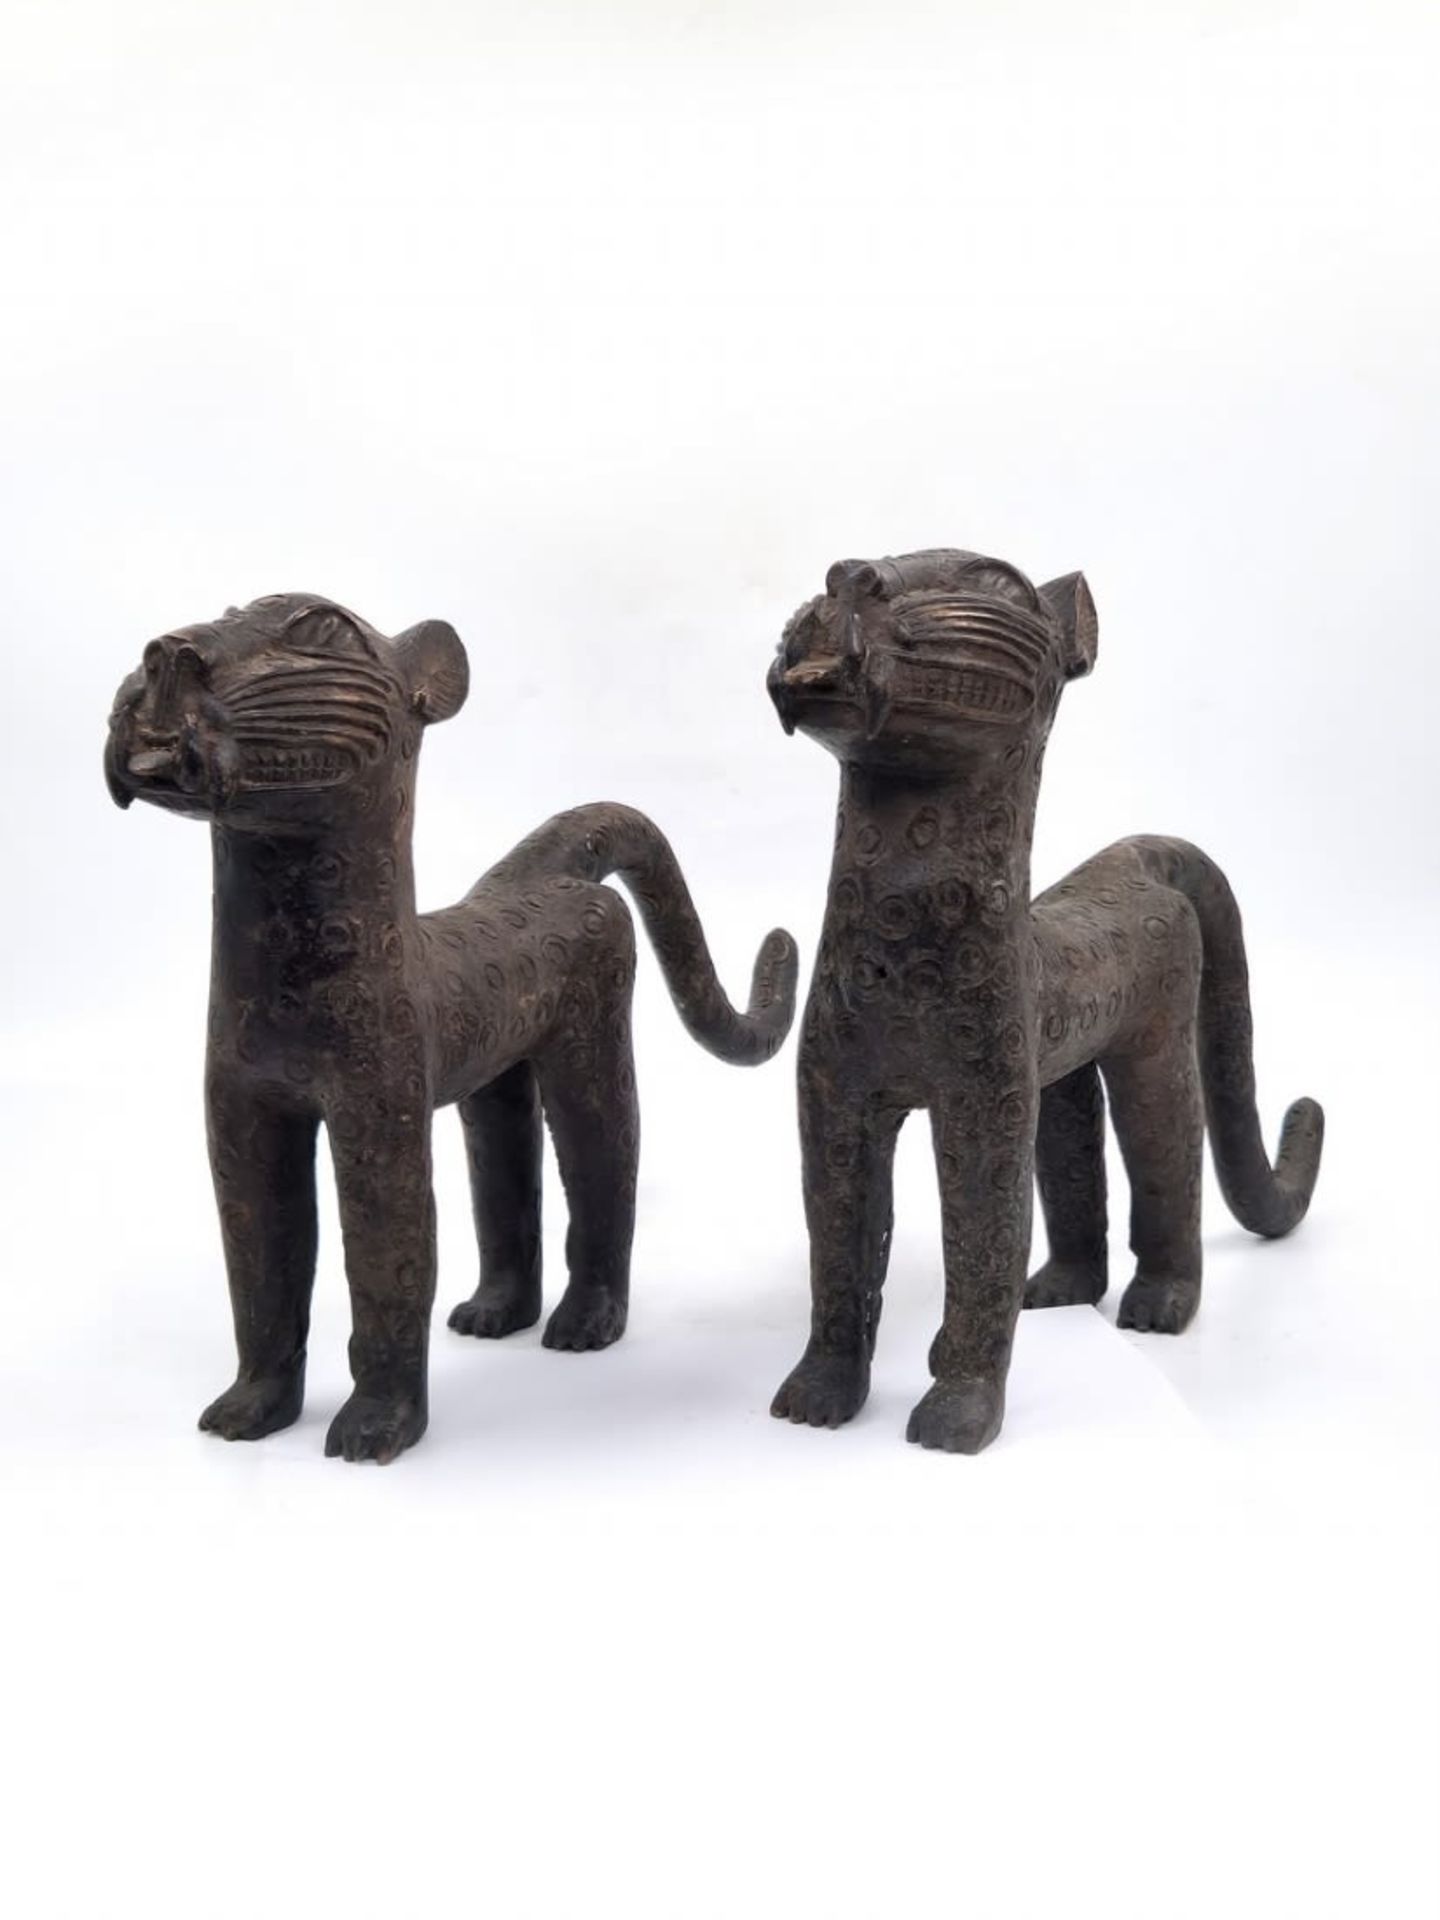 A pair of antique African statues, around hundred years old, in the form of panthers, made in '